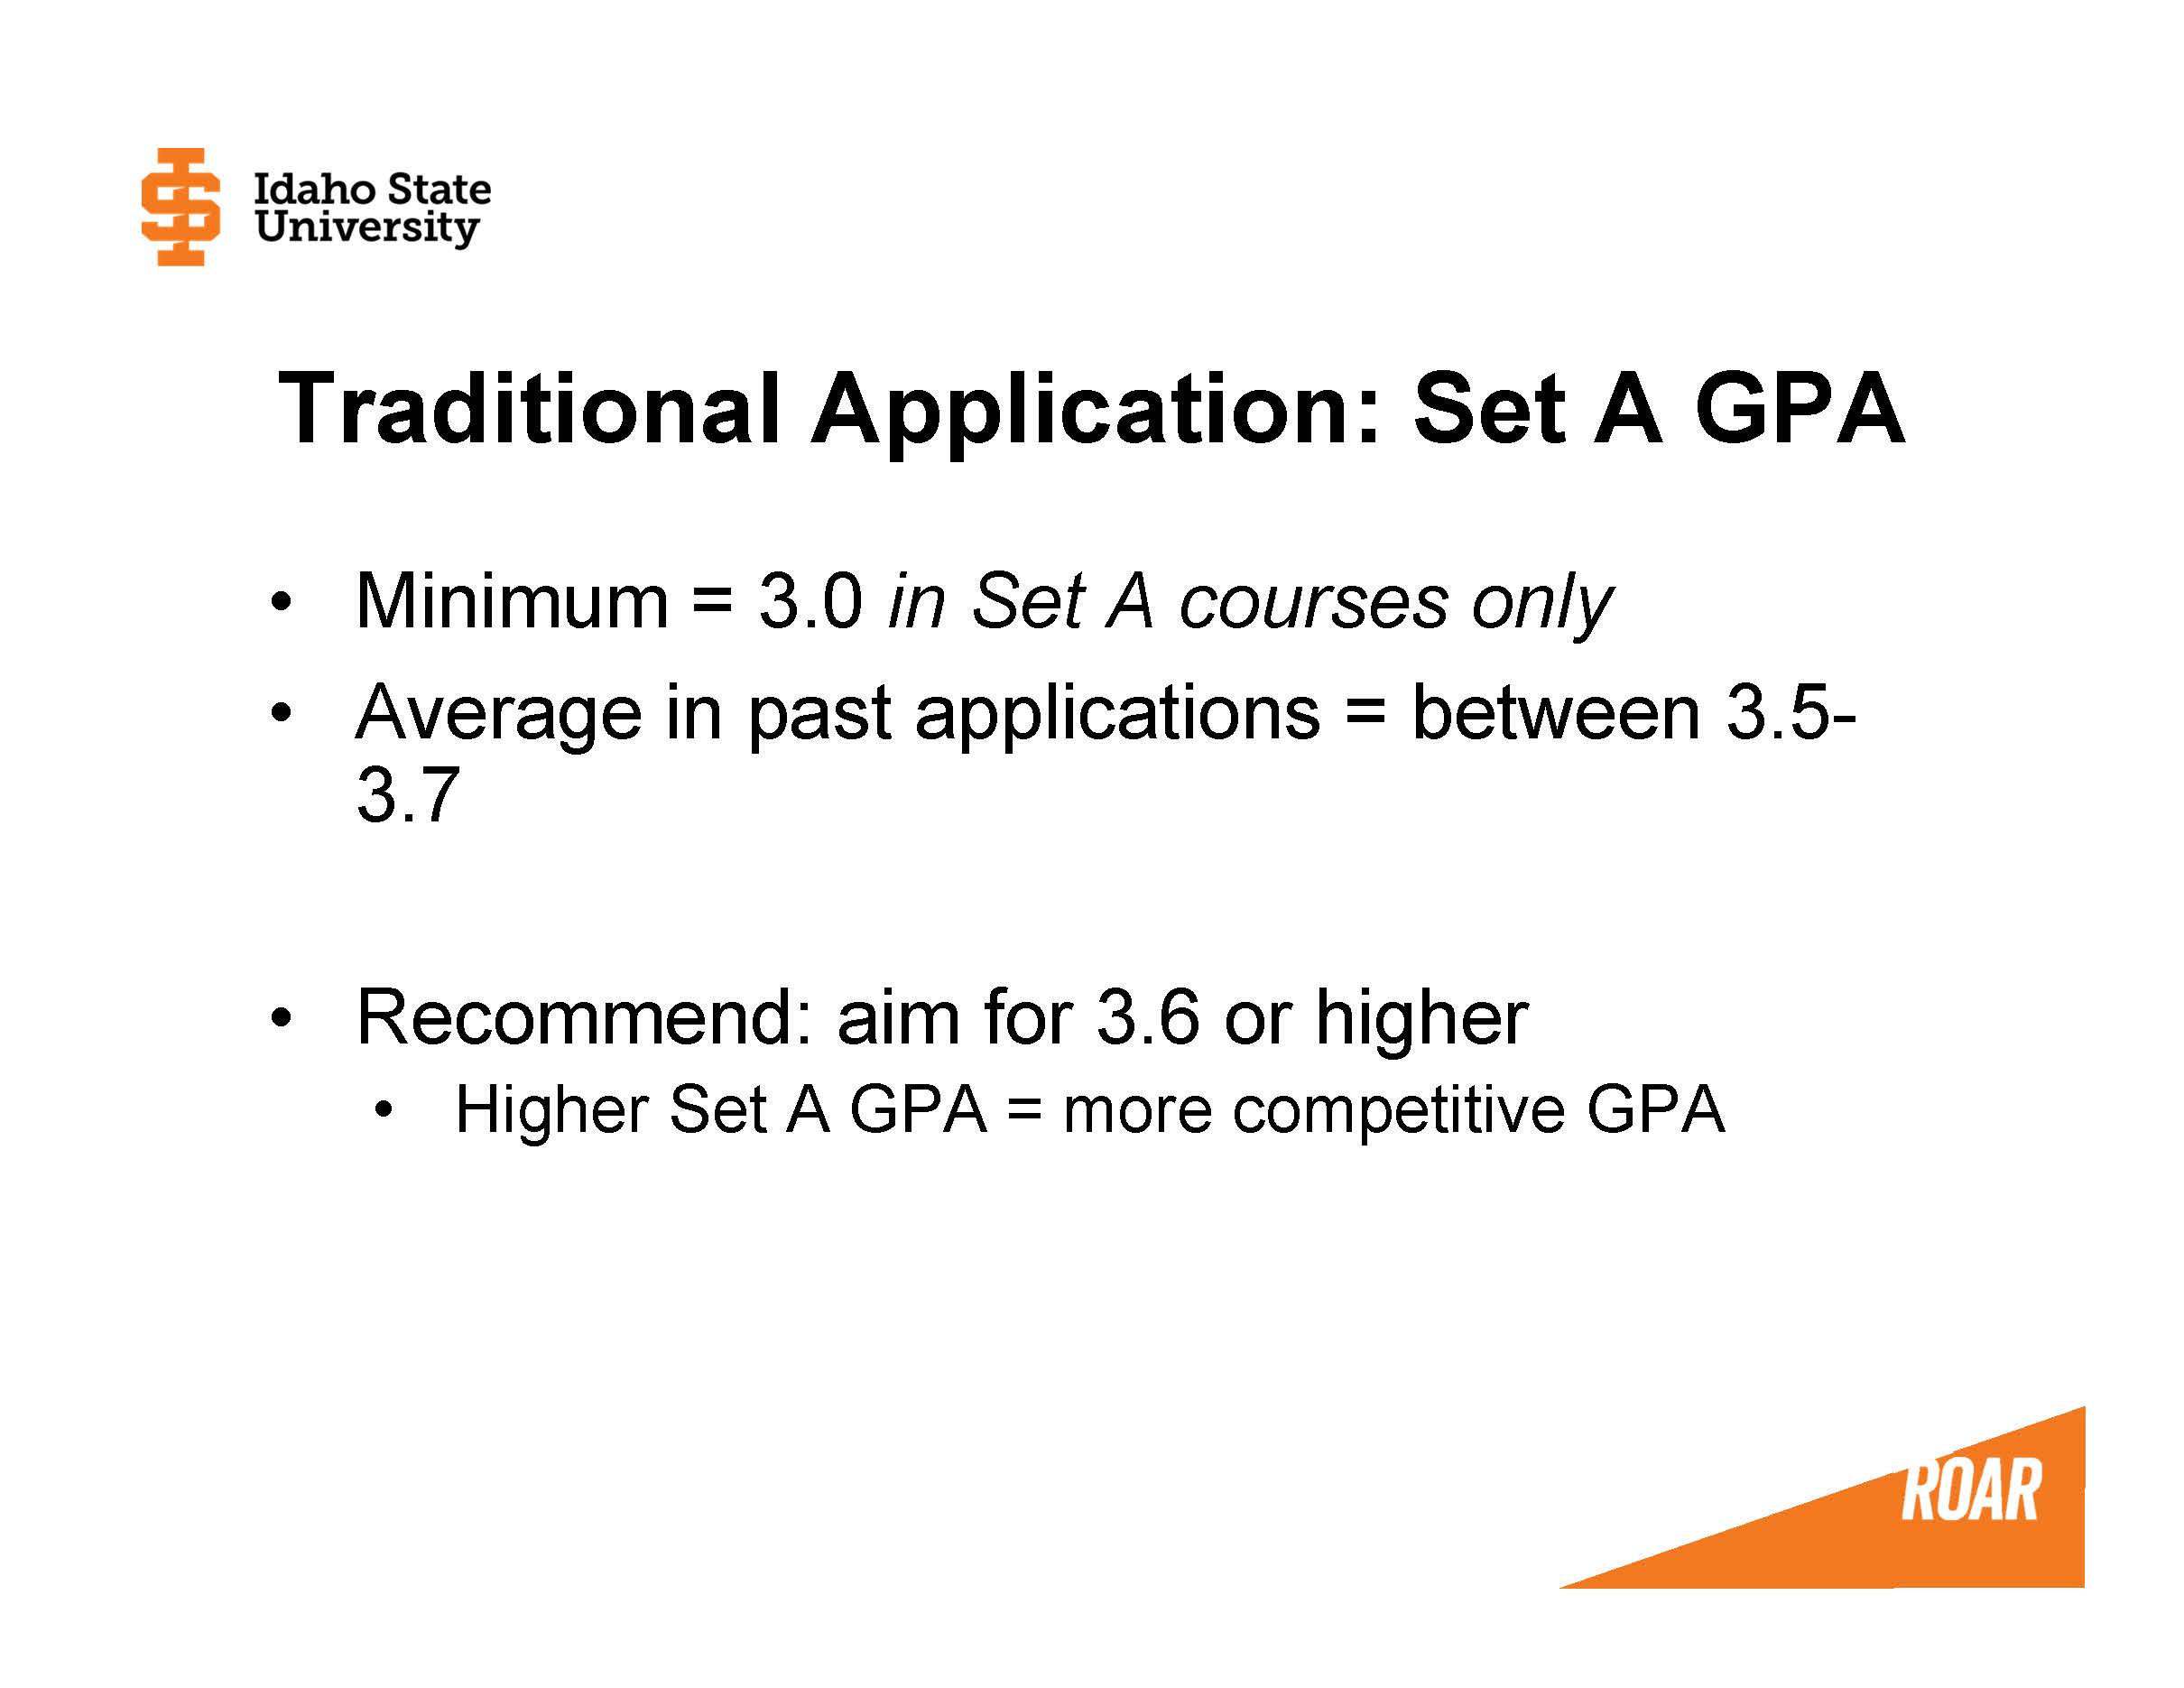 Minimum = 3.0 in Set A courses only Average in past applications = between 3.5-3.7  Recommend: aim for 3.6 or higher Higher Set A GPA = more competitive GPA